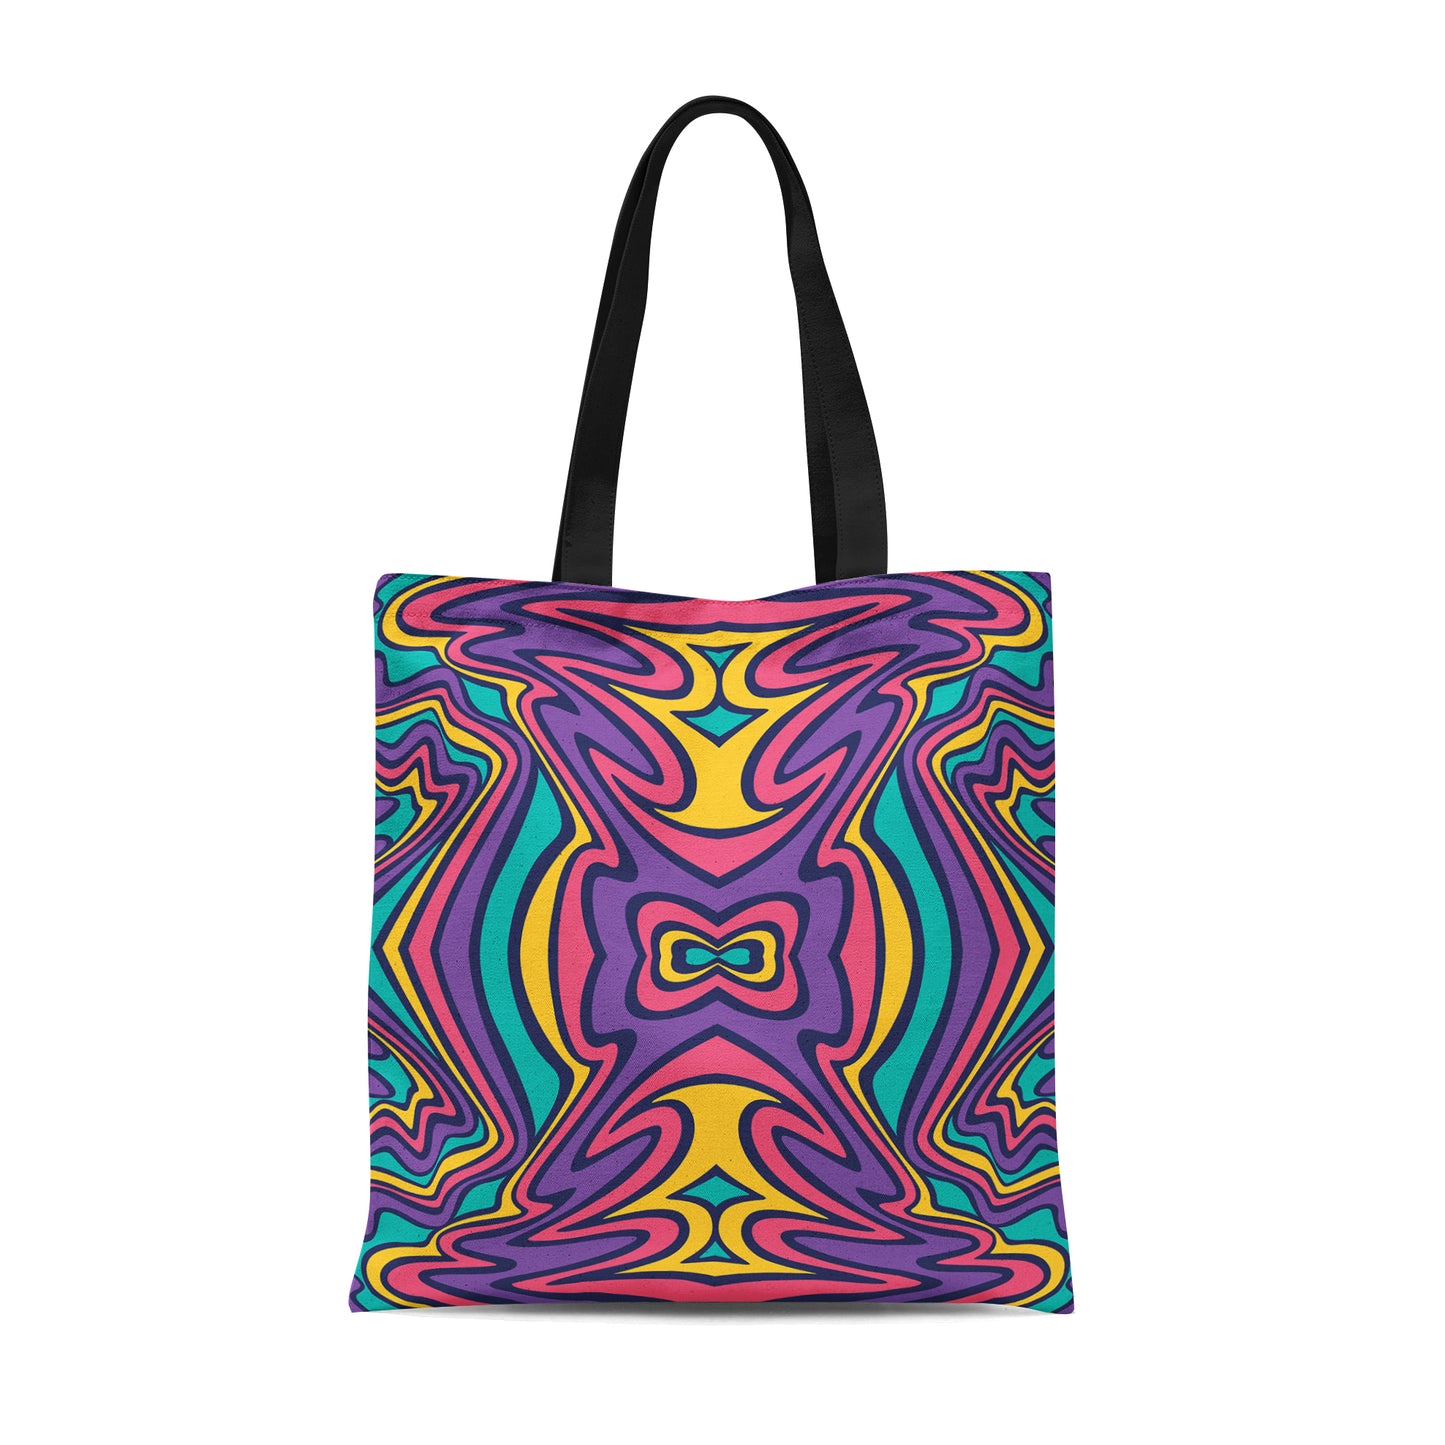 Tote Bag with Psychedelic Print